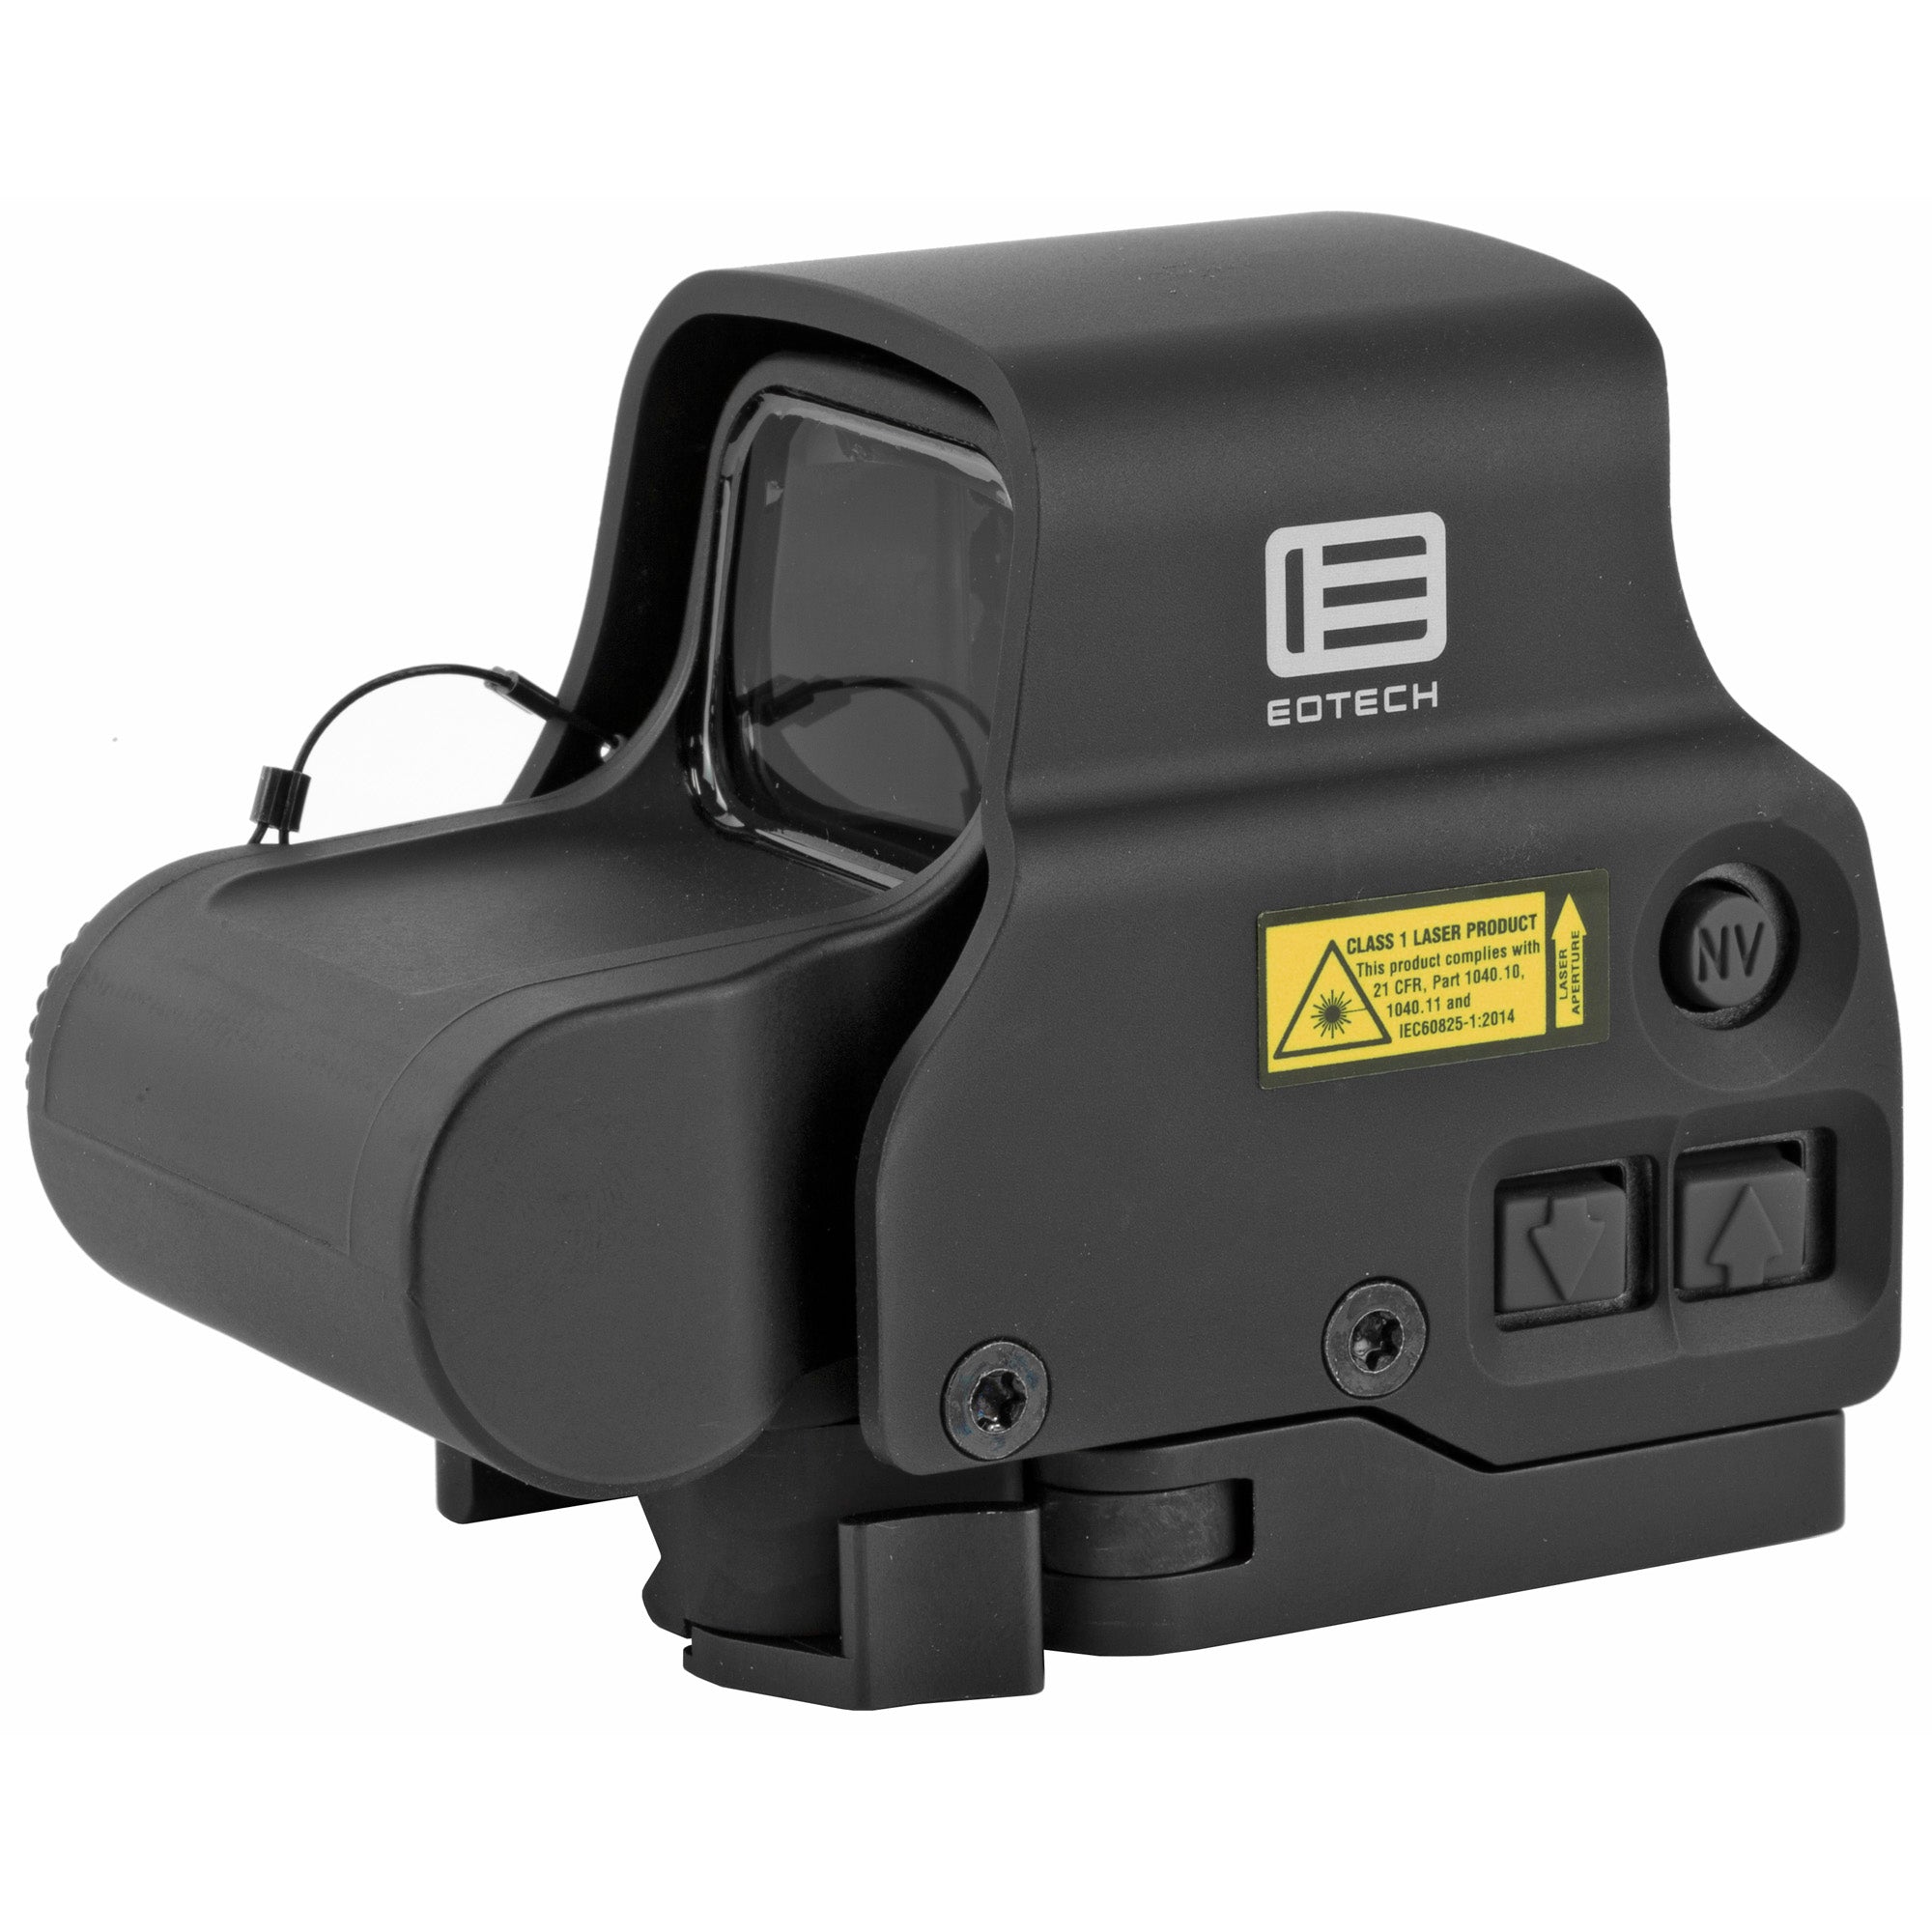 EOTech EXPS3 Holographic Sight in Black with Red 68 MOA Ring and 1 MOA Dot, night vision compatible, featuring quick disconnect mount